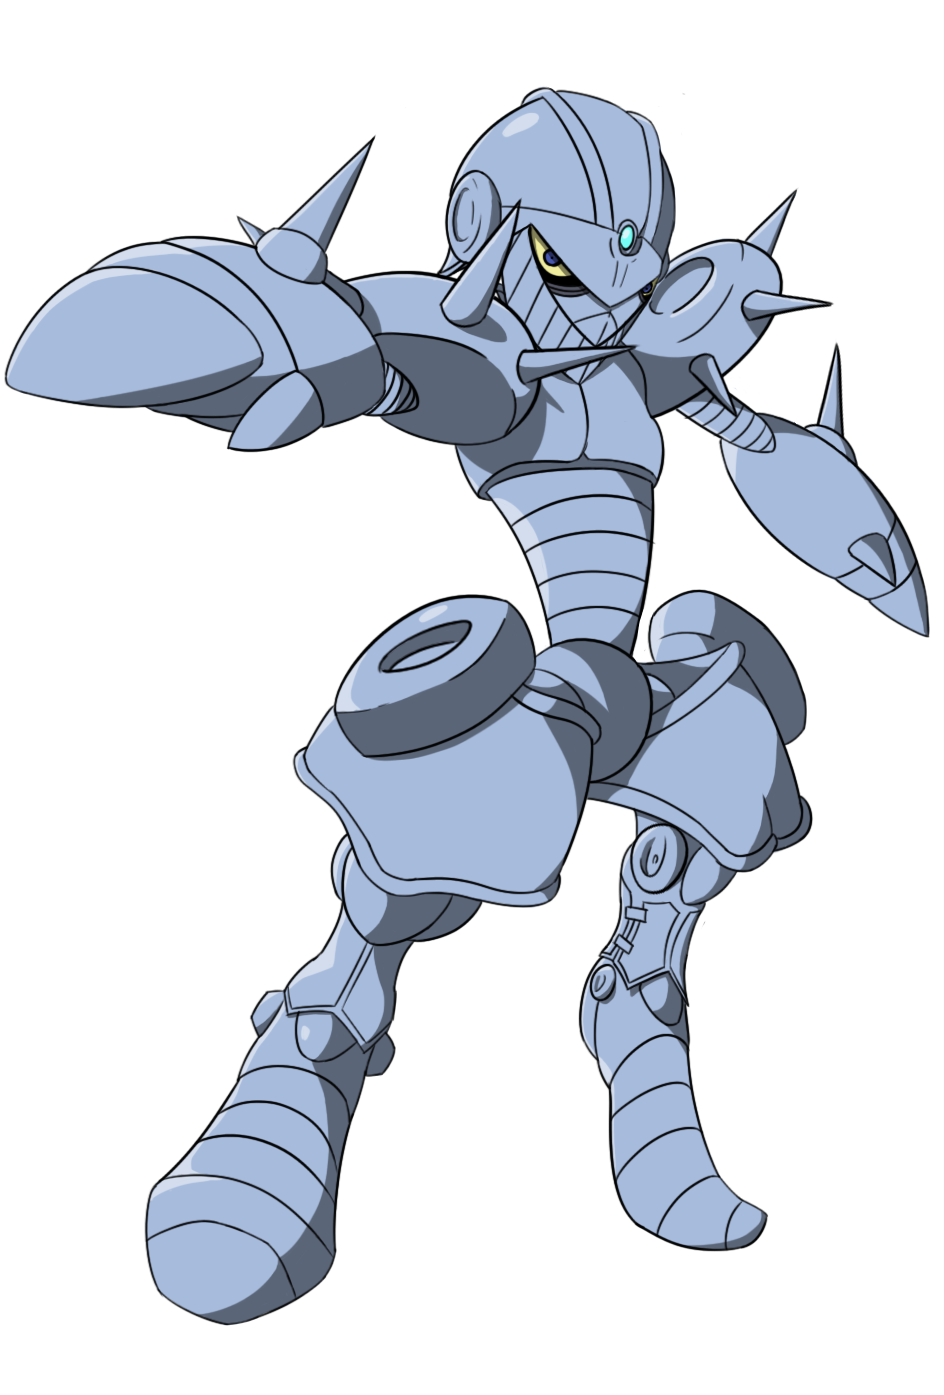 Armorless Silver Chariot by cross-wired-freak on DeviantArt